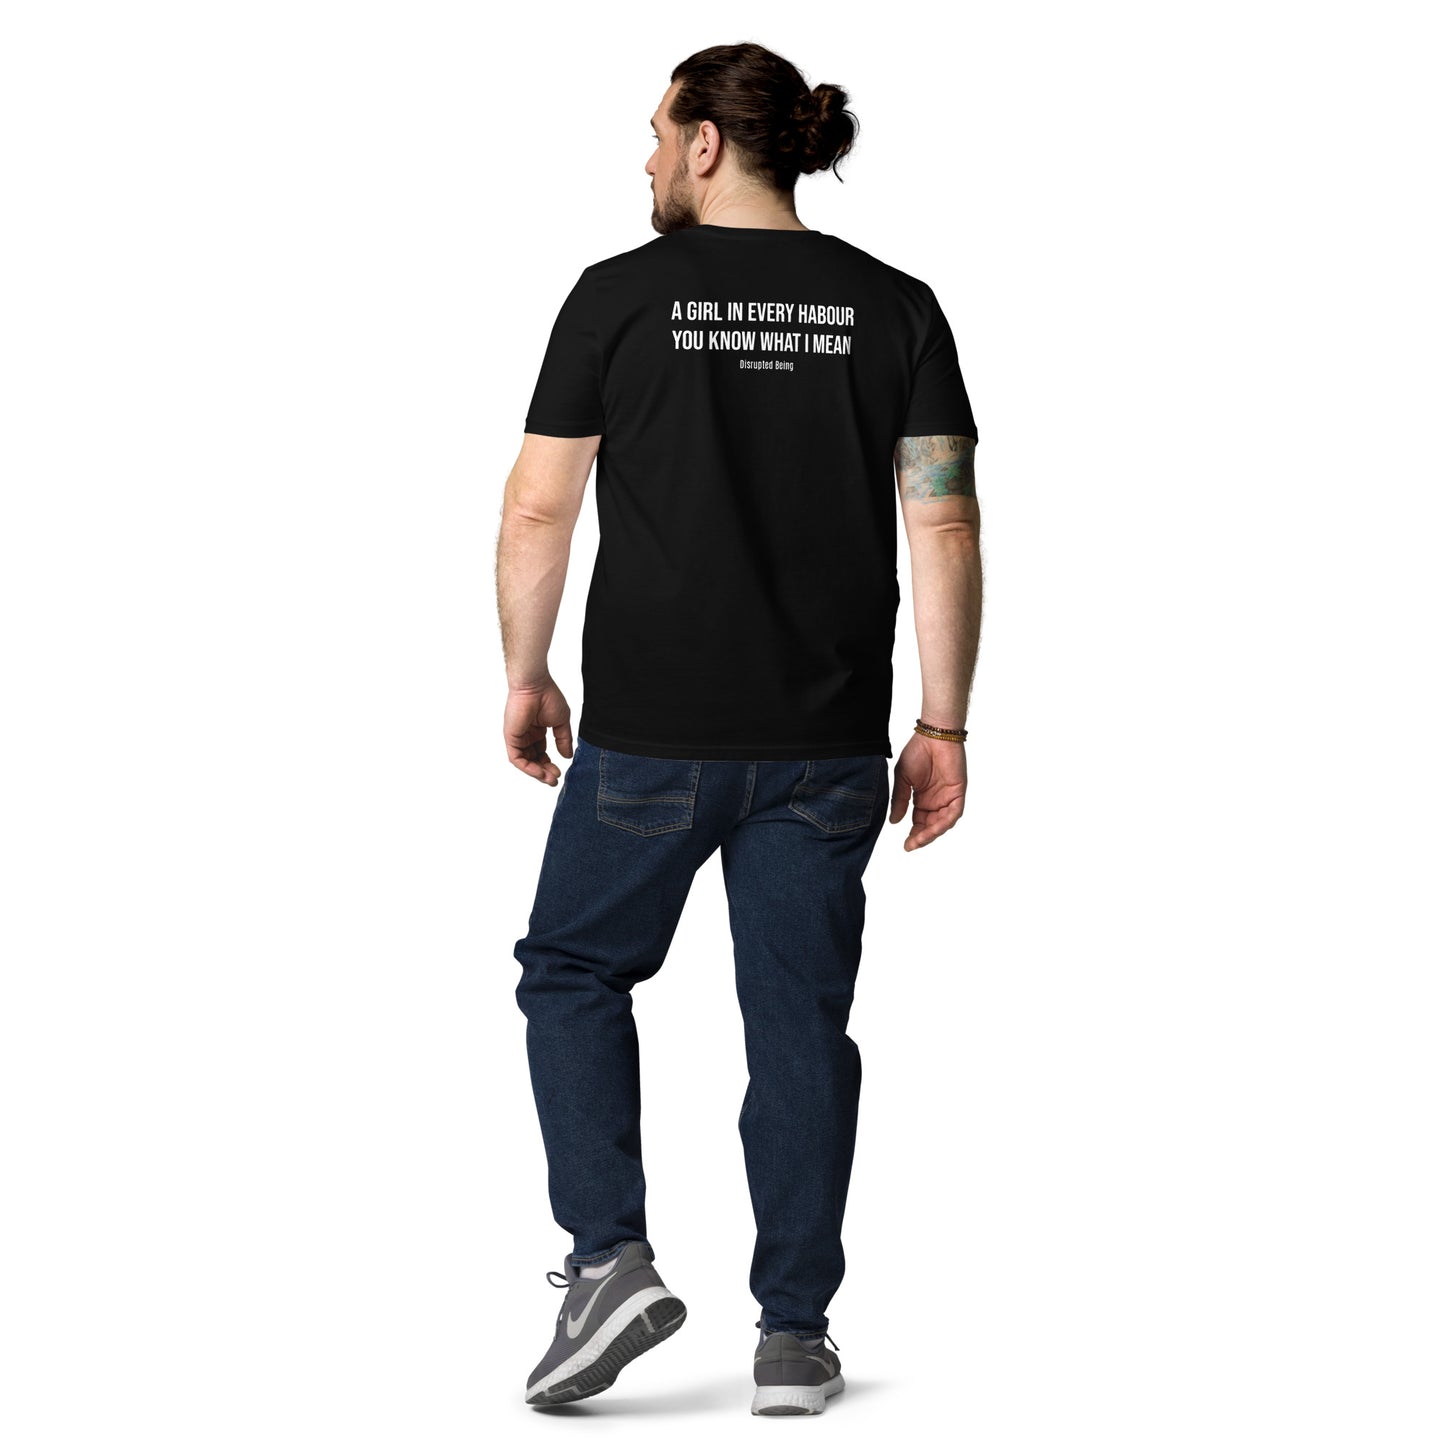 Disrupted Being, Sailor official cover/lyrics, Unisex organic cotton t-shirt